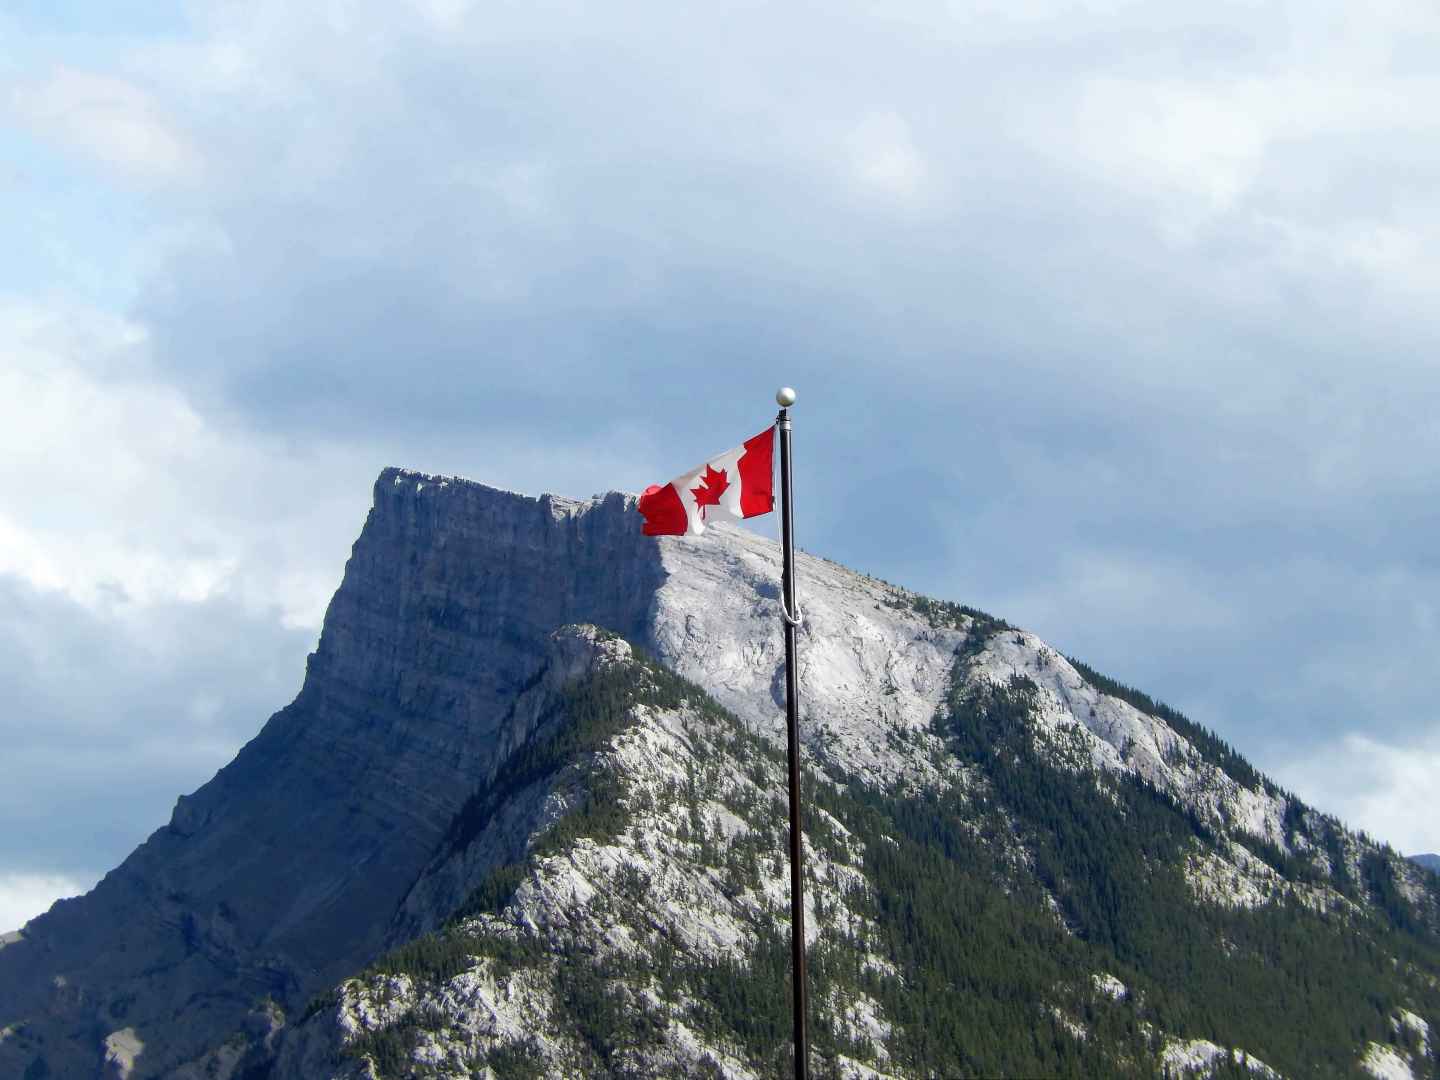 This is the Best Guide to Backpacking Canada (2021)